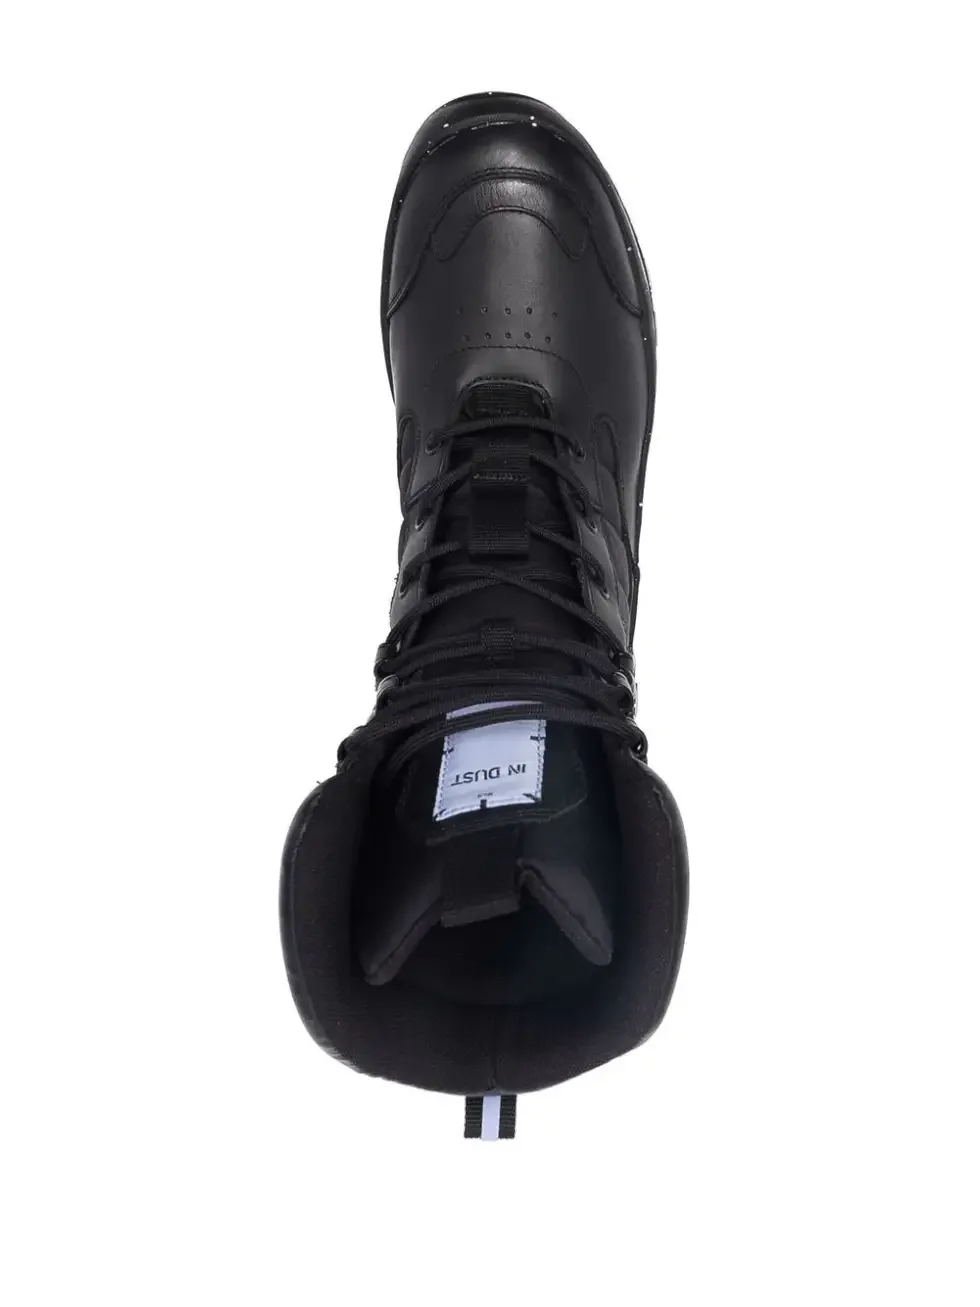 MCQ Releases A Blackout Pair Of Tactical Boots It Calls The Icon In Dust